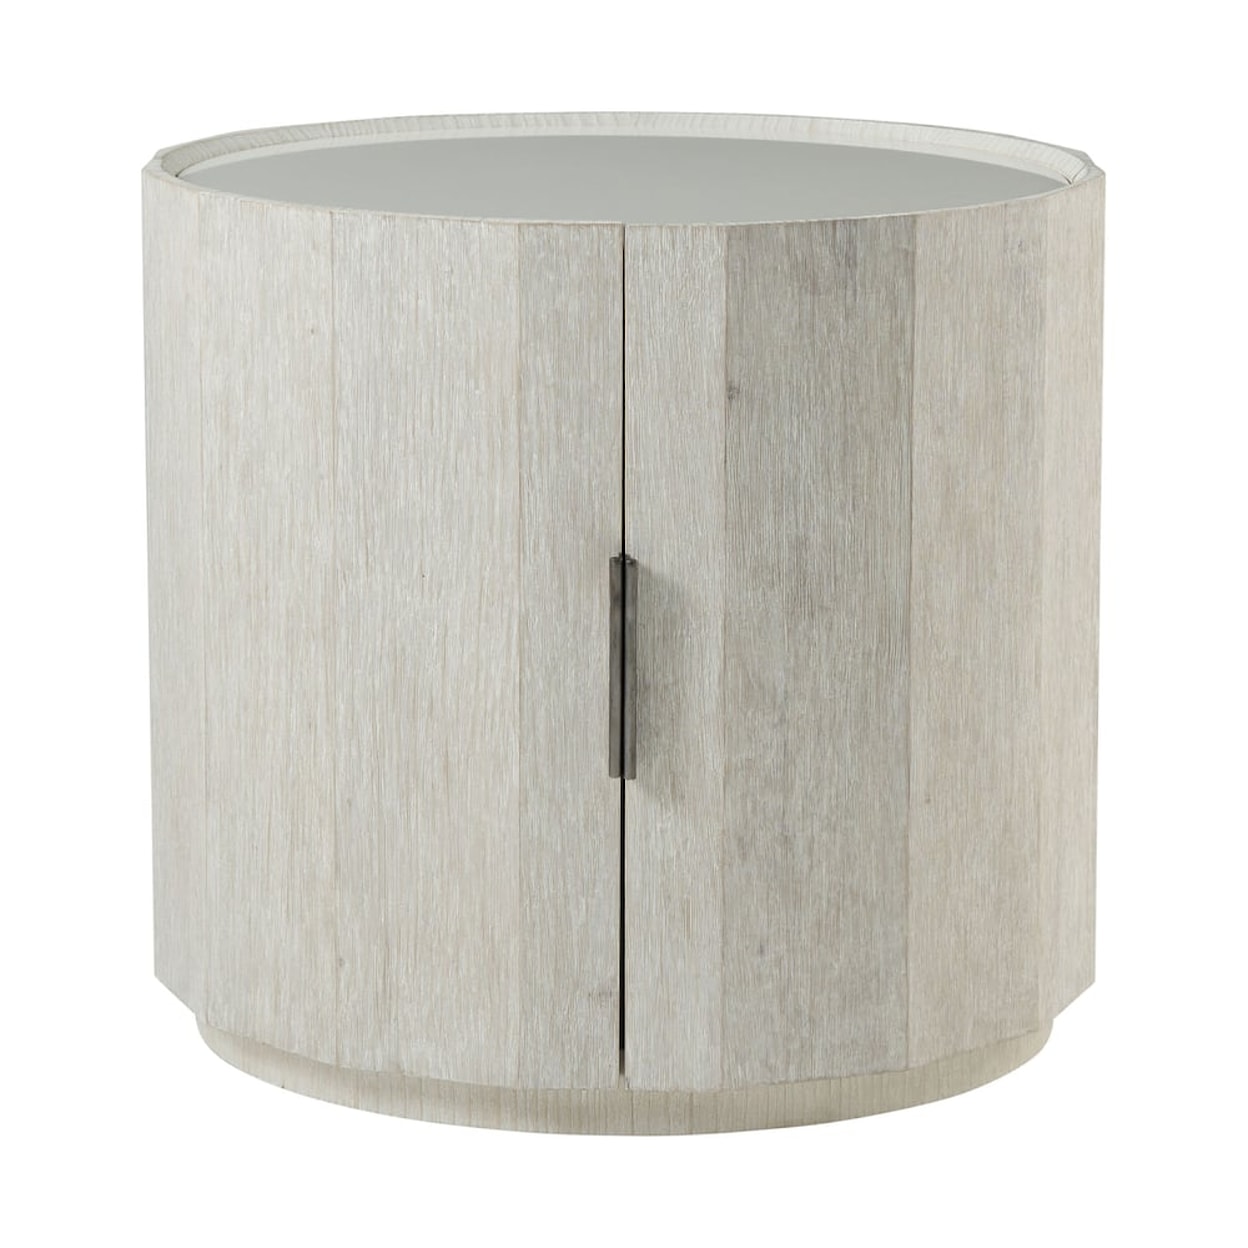 Theodore Alexander Breeze Round Side Table with Storage